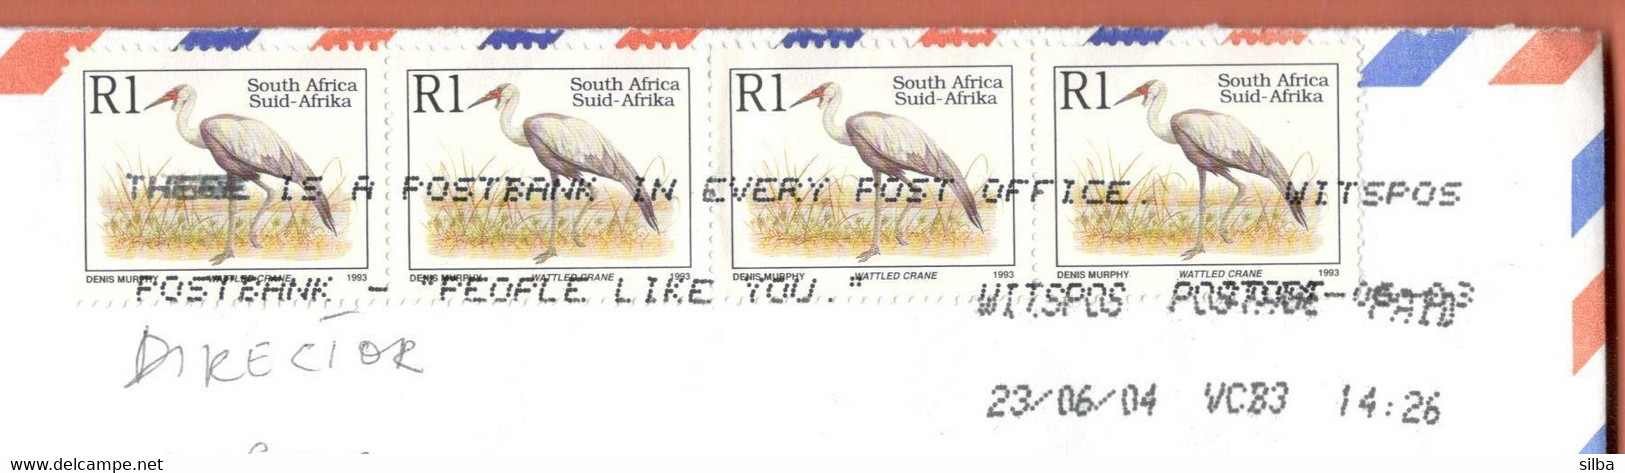 South Africa Witspos 2004 / There Is A Postbank In Every Post Office / Machine Stamp Slogan / Bird Wattled Crane 1993 - Brieven En Documenten